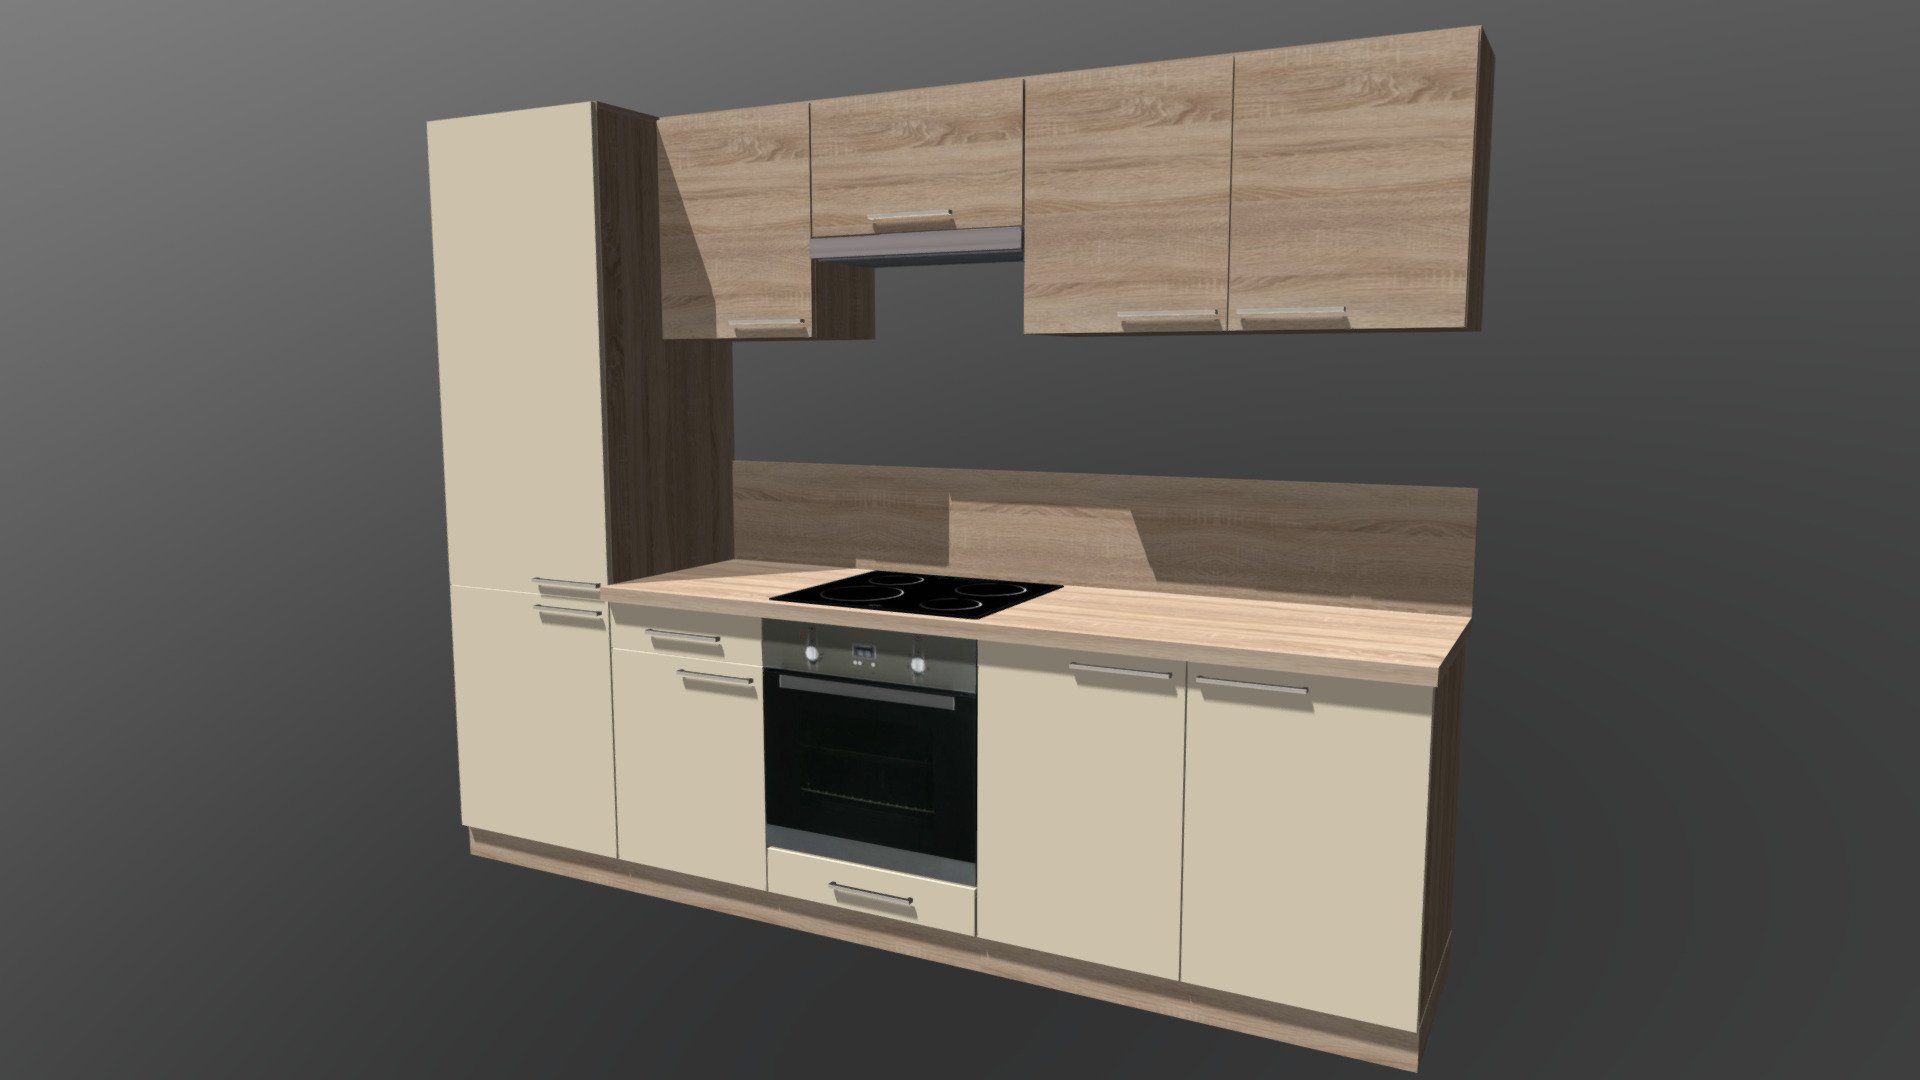 Kitchen cabinet, created by free cabinet deisgn software. The modell can also be downloaded in its original file format. It also contains the parts list and assembly drawings. Based on these, the furniture can be built in reality. The cad software can be downloaded here:http://www.freecabinetcad.com

Az ms_Bútortervező ingyenes programmal készített konyhabútor. A rajz elérhető az eredeti fájlformátumban is. A tervező szoftver innen letölthető : http://www.butortervezo.com

Length: 2710 mm - Kitchen Cabinet 10 - Buy Royalty Free 3D model by ms_Butor (@butortervezo) 3d model